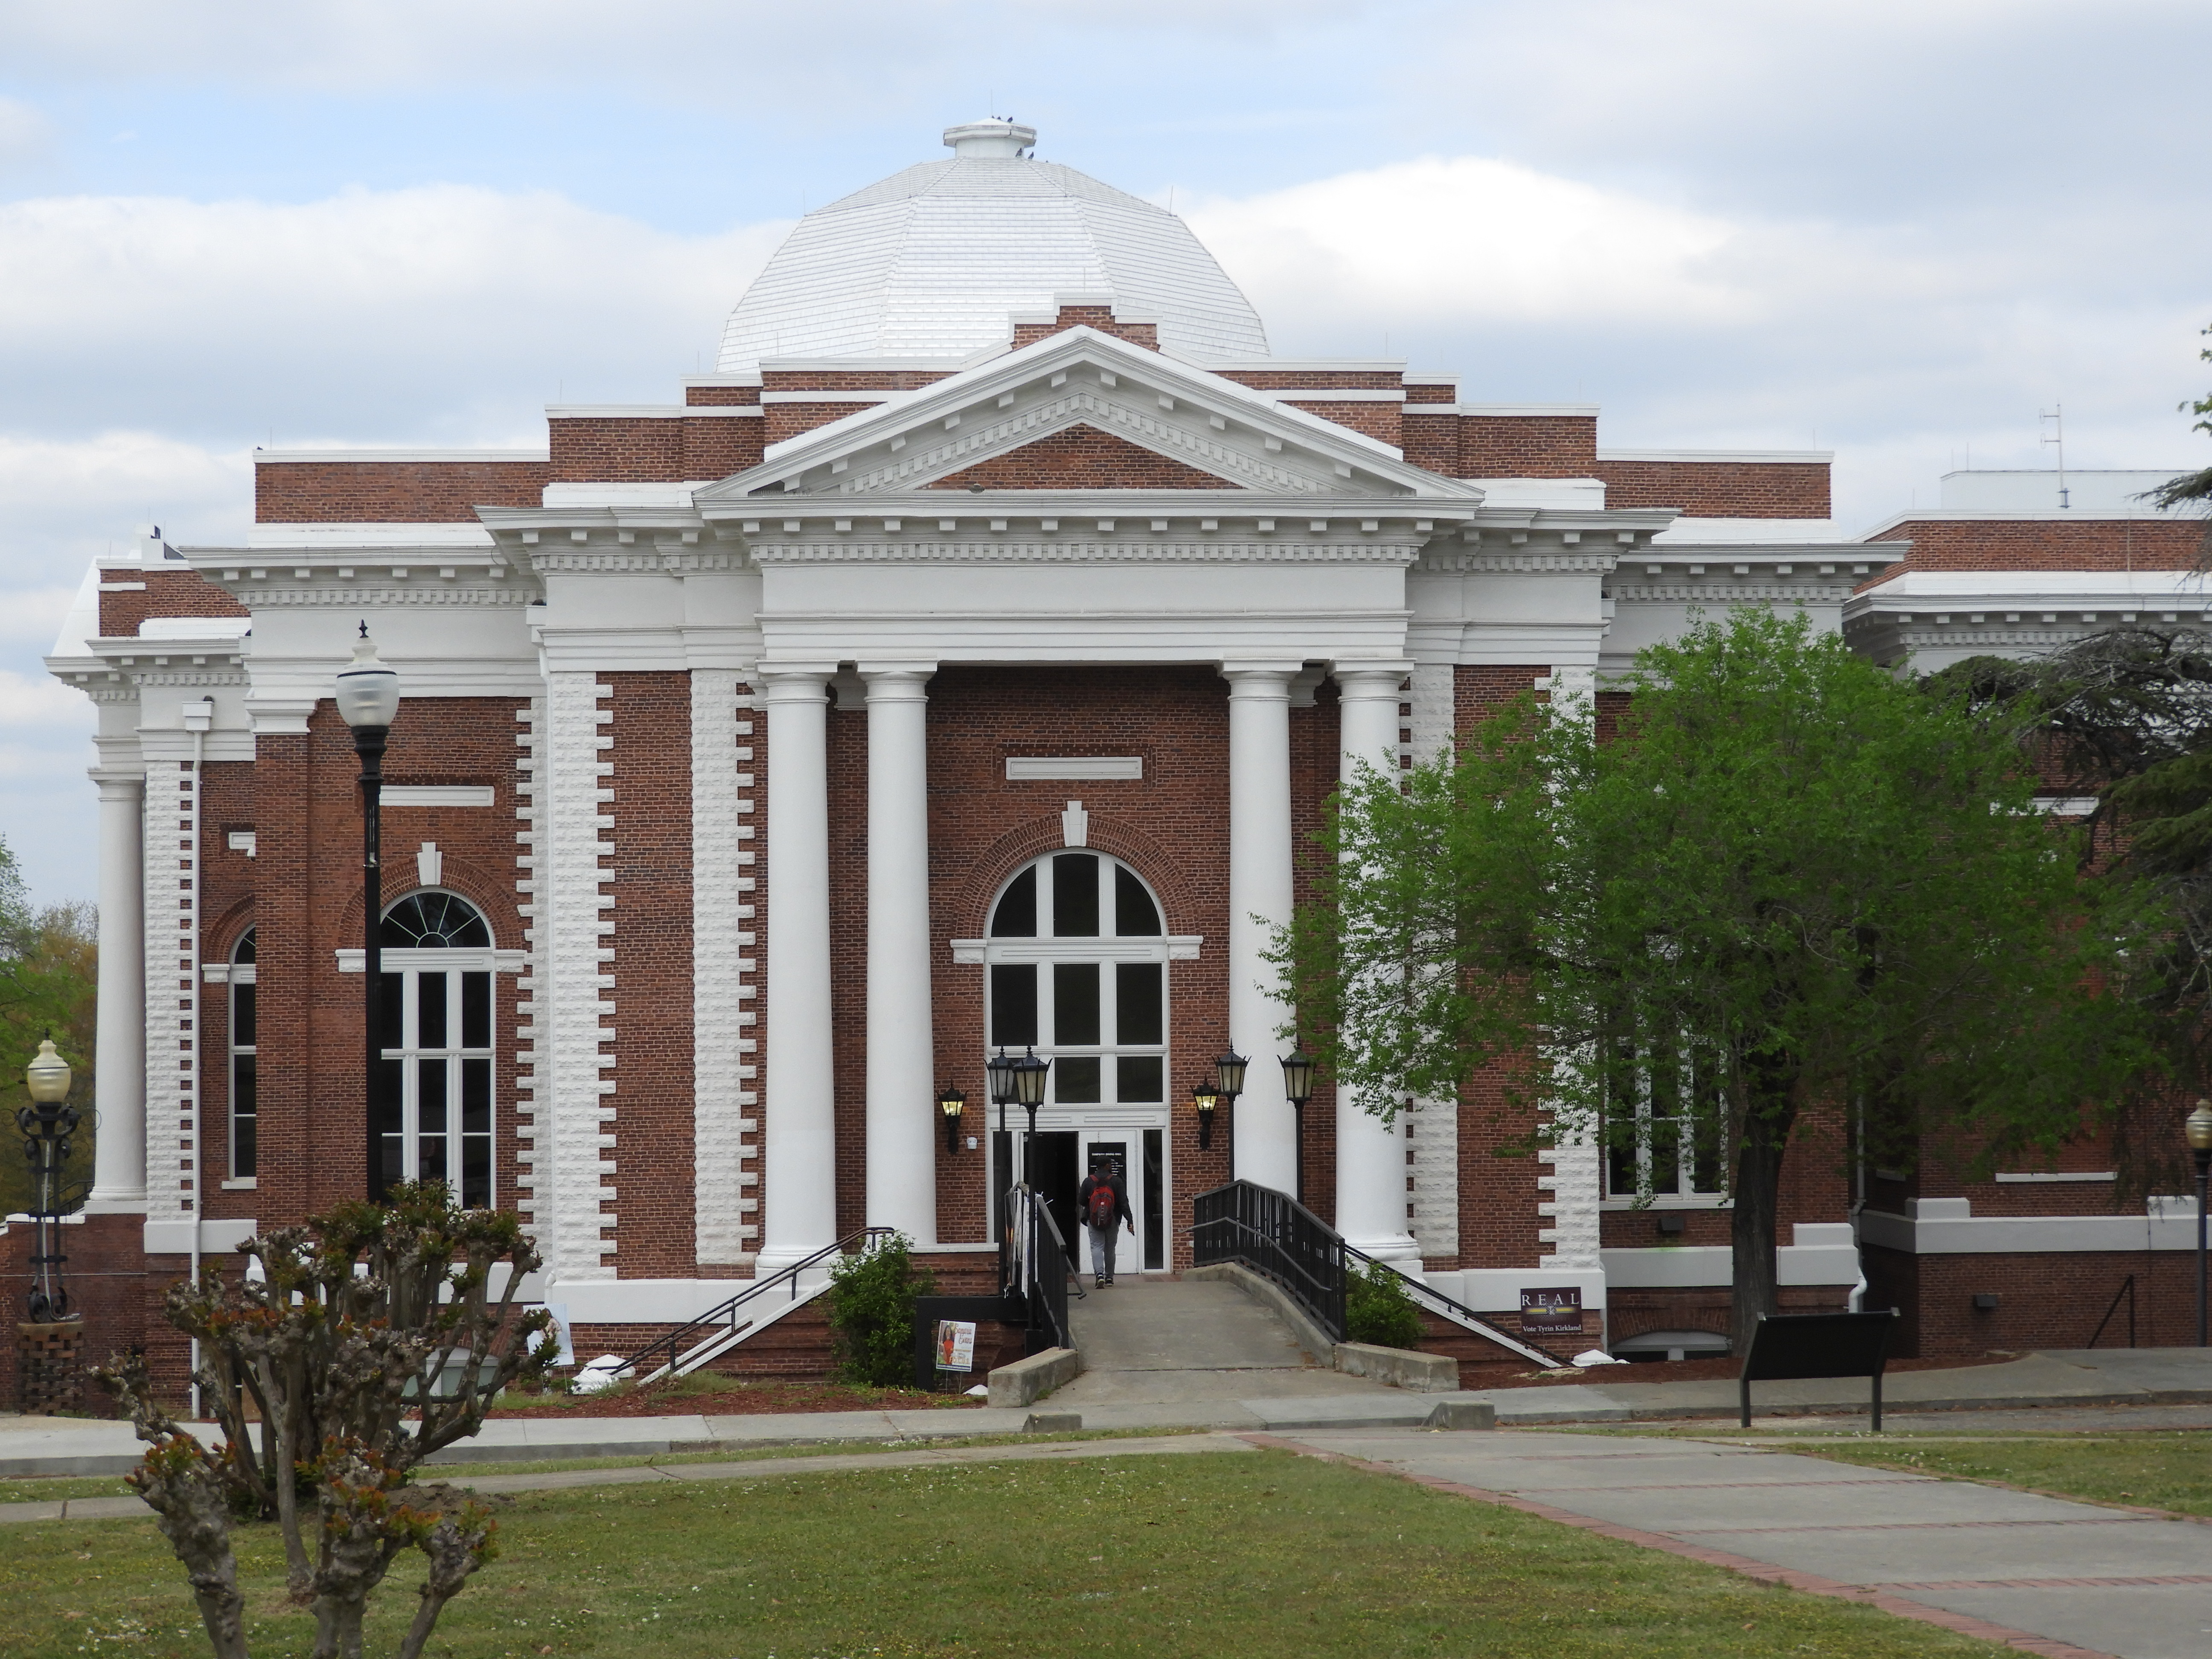 Building on campus of Tuskegee University in Tuskegee Alabama